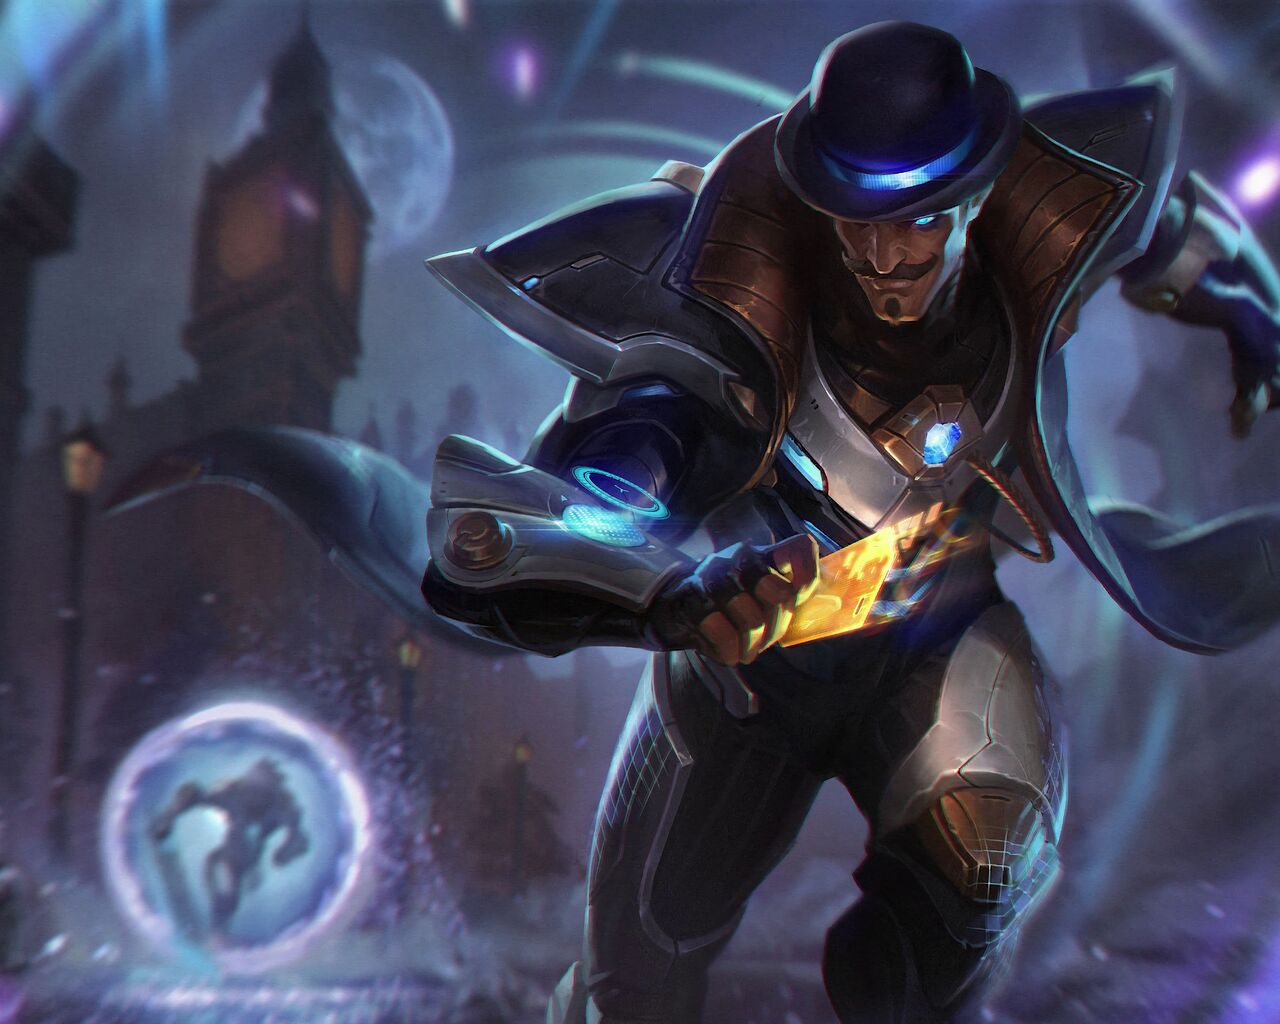 twisted-fate-skins-league-of-legends-game-z1.jpg. 